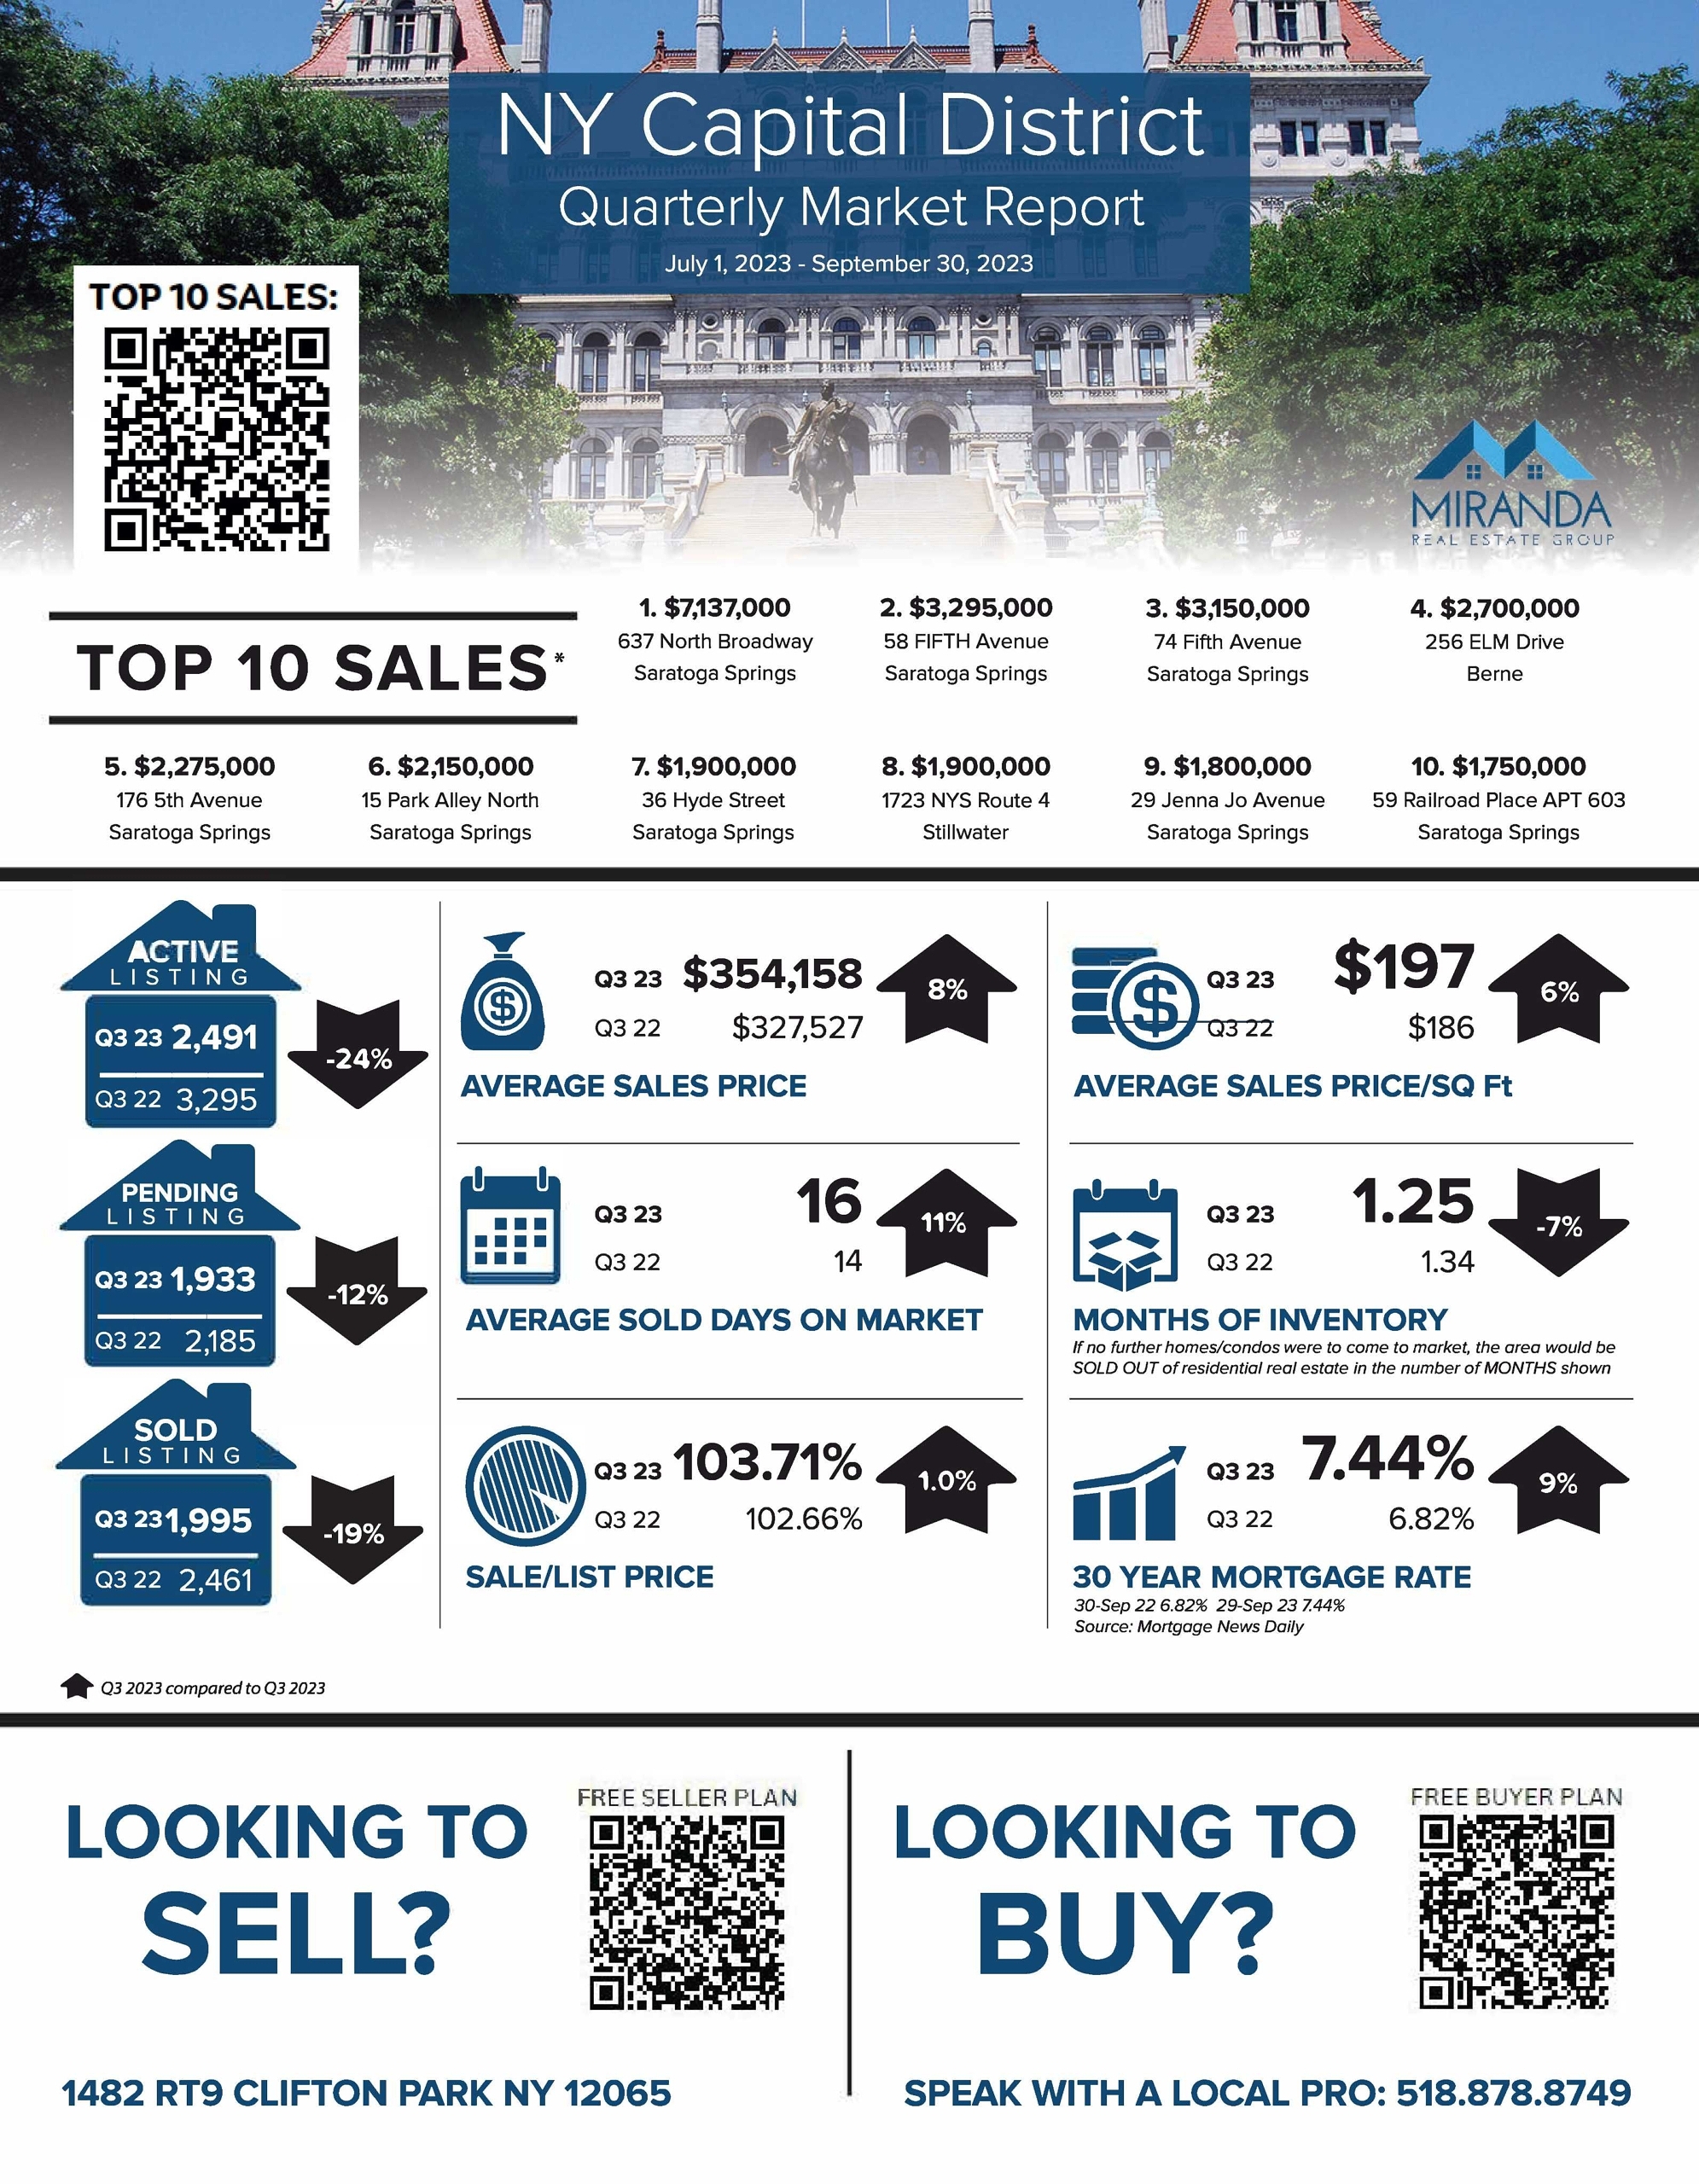 NY CAPITAL DISTRICT Q3 ’23 MARKET UPDATE | PRICES REACH A NEW 12-MONTH HIGH